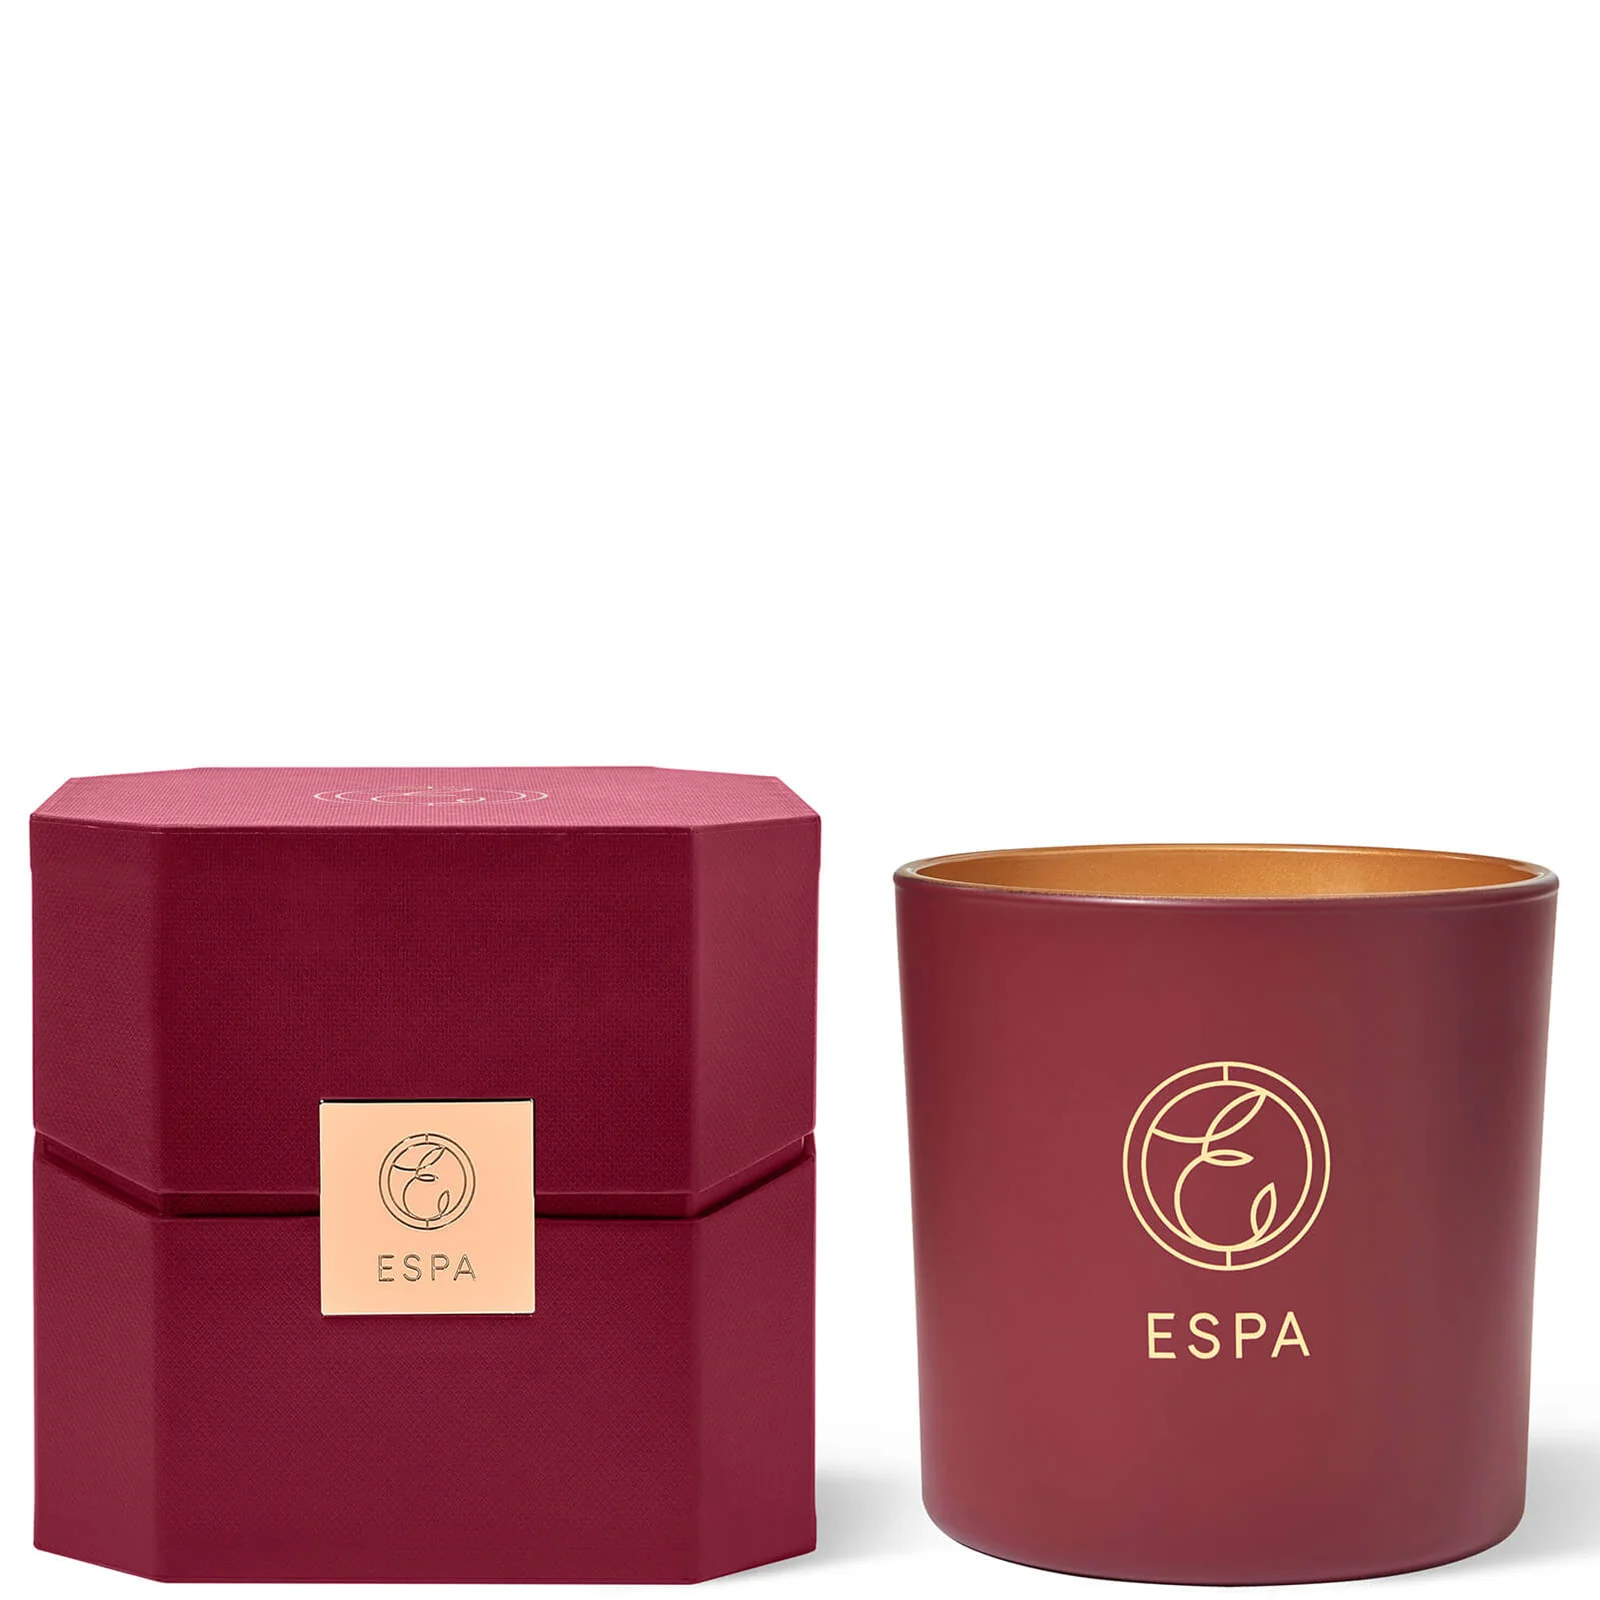 ESPA Frankincense and Myrhh 5-Wick Candle Image 1